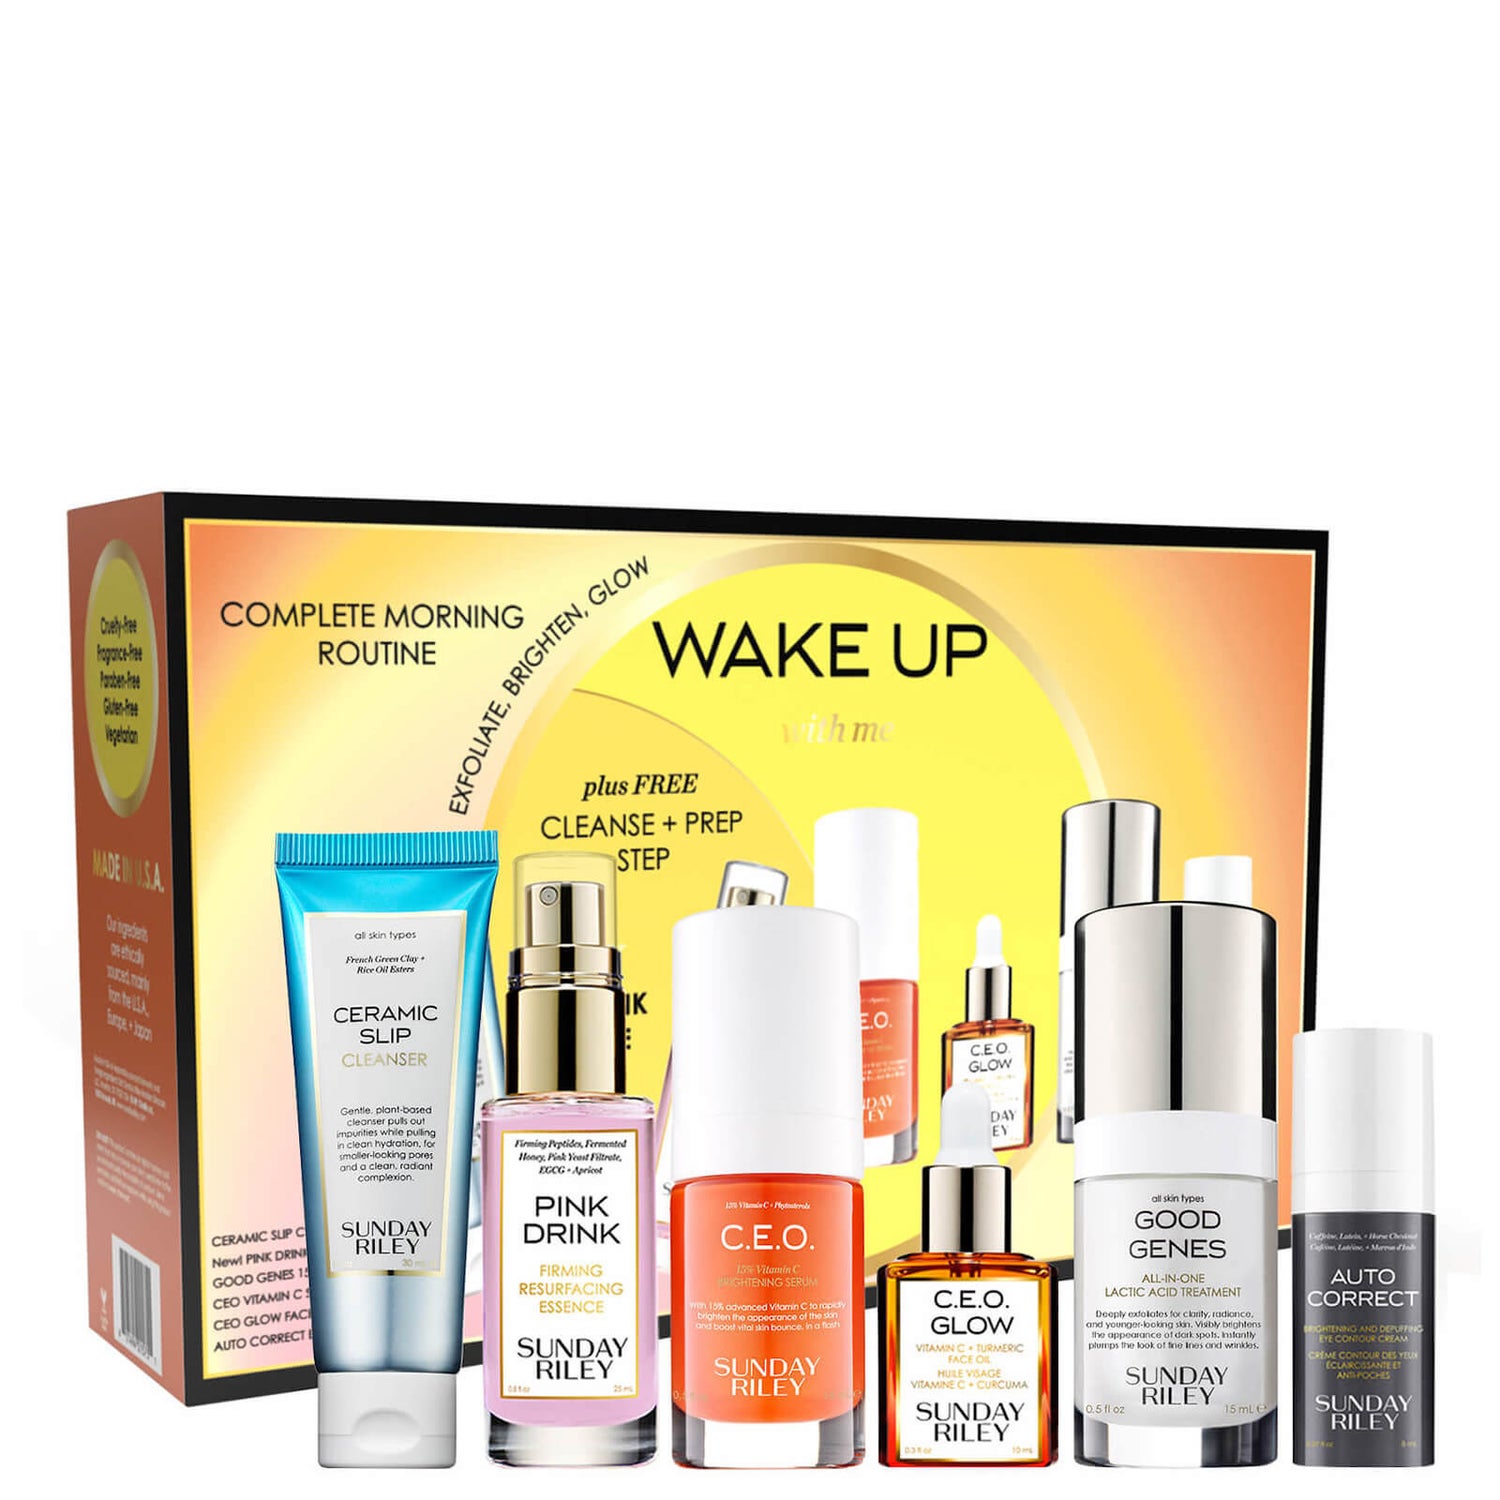 Sunday Riley Wake Up With Me: Complete Morning Skincare Routine 6 piece - $158 Value